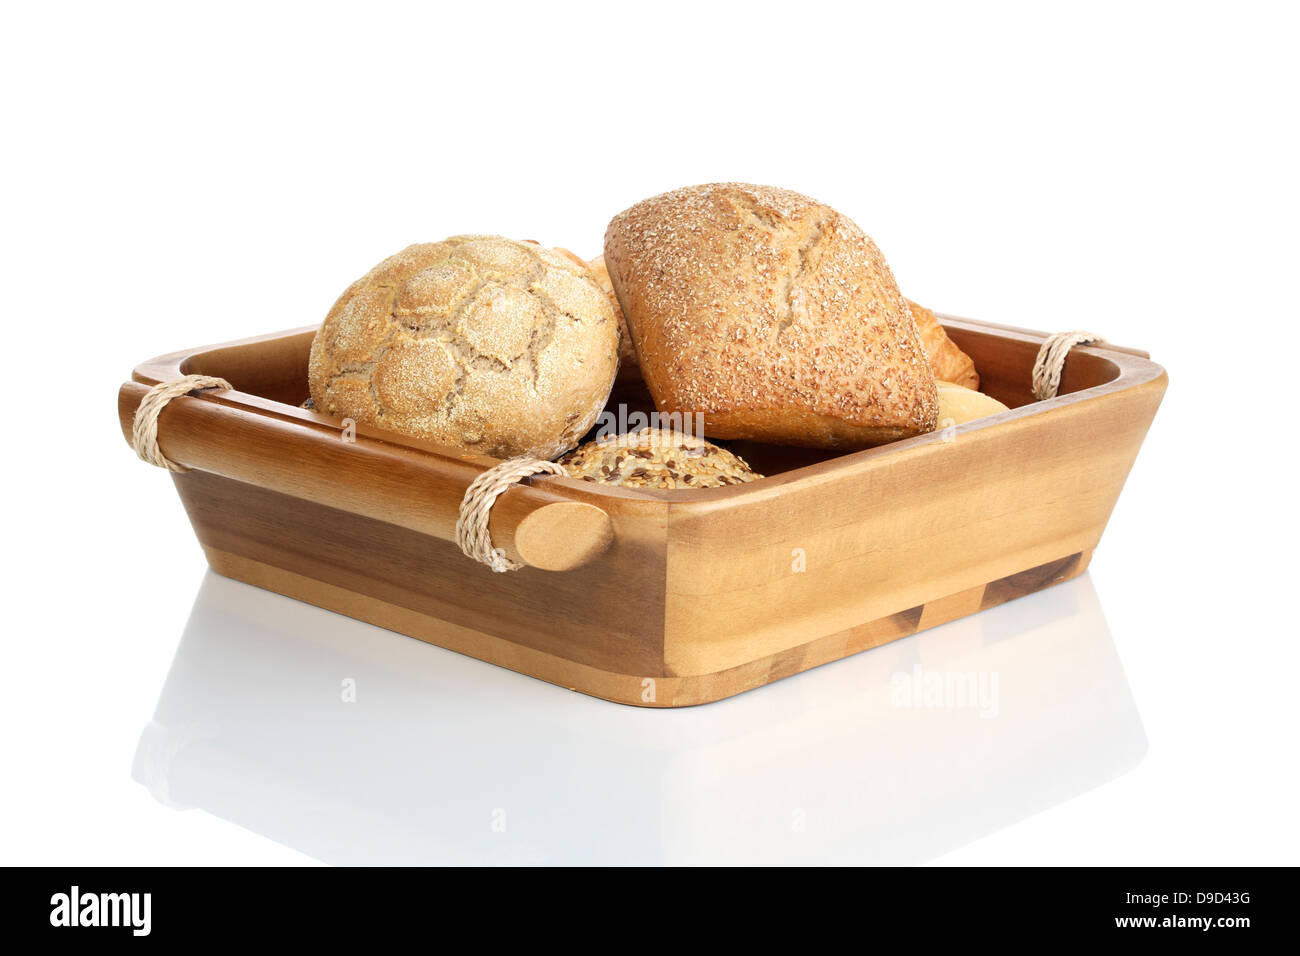 Basket with bread roll Stock Photo